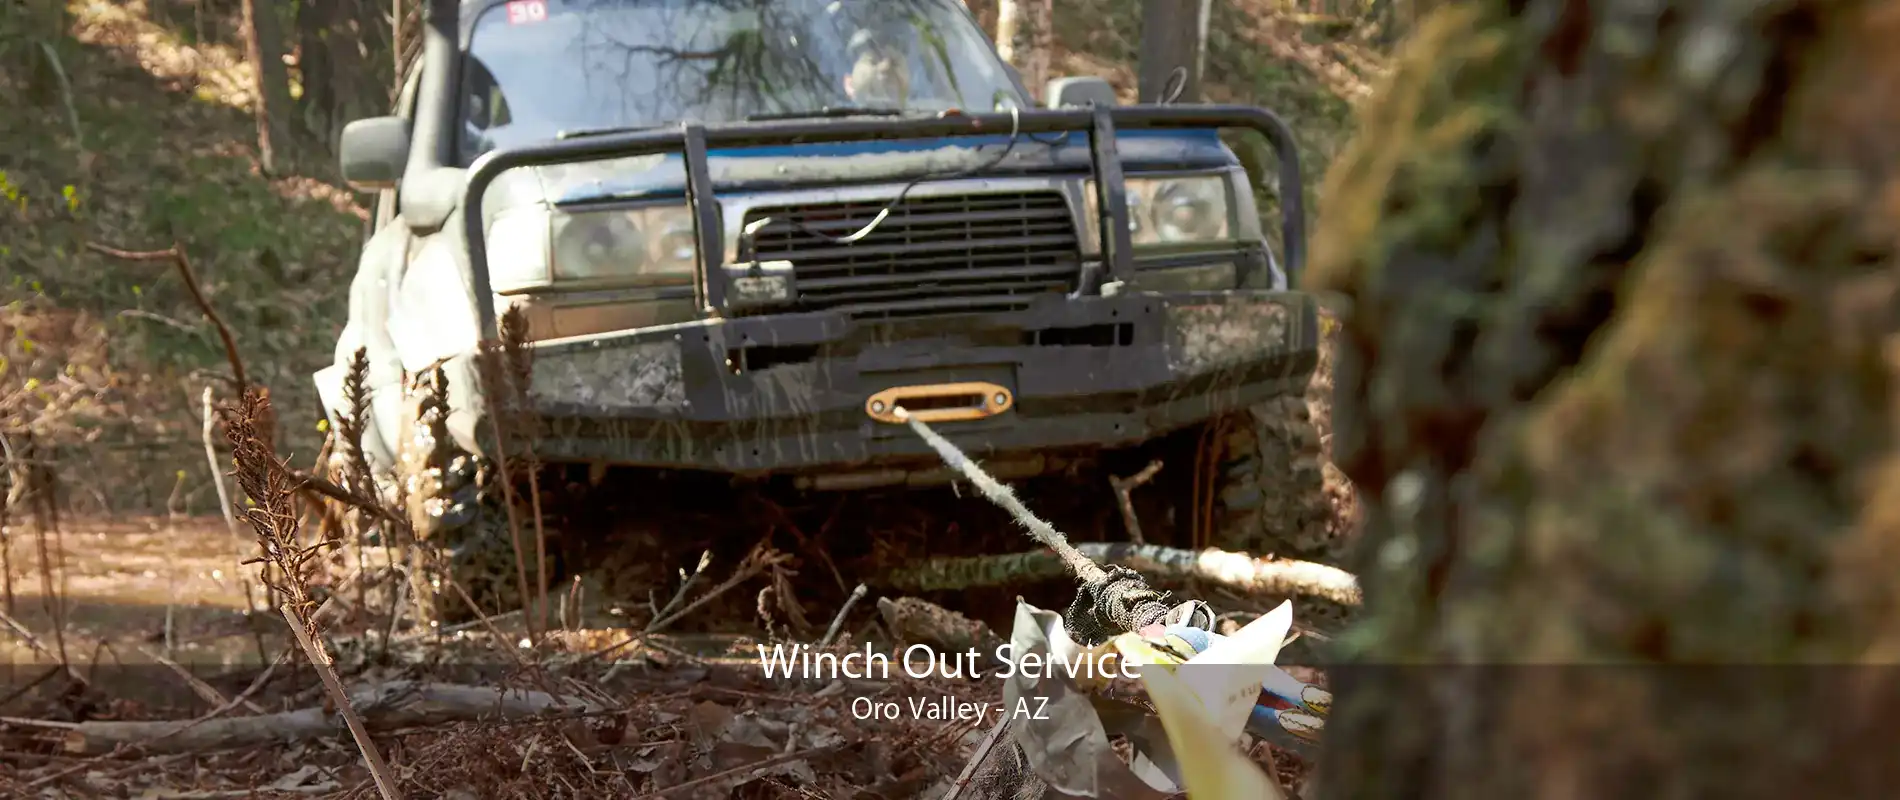 Winch Out Service Oro Valley - AZ